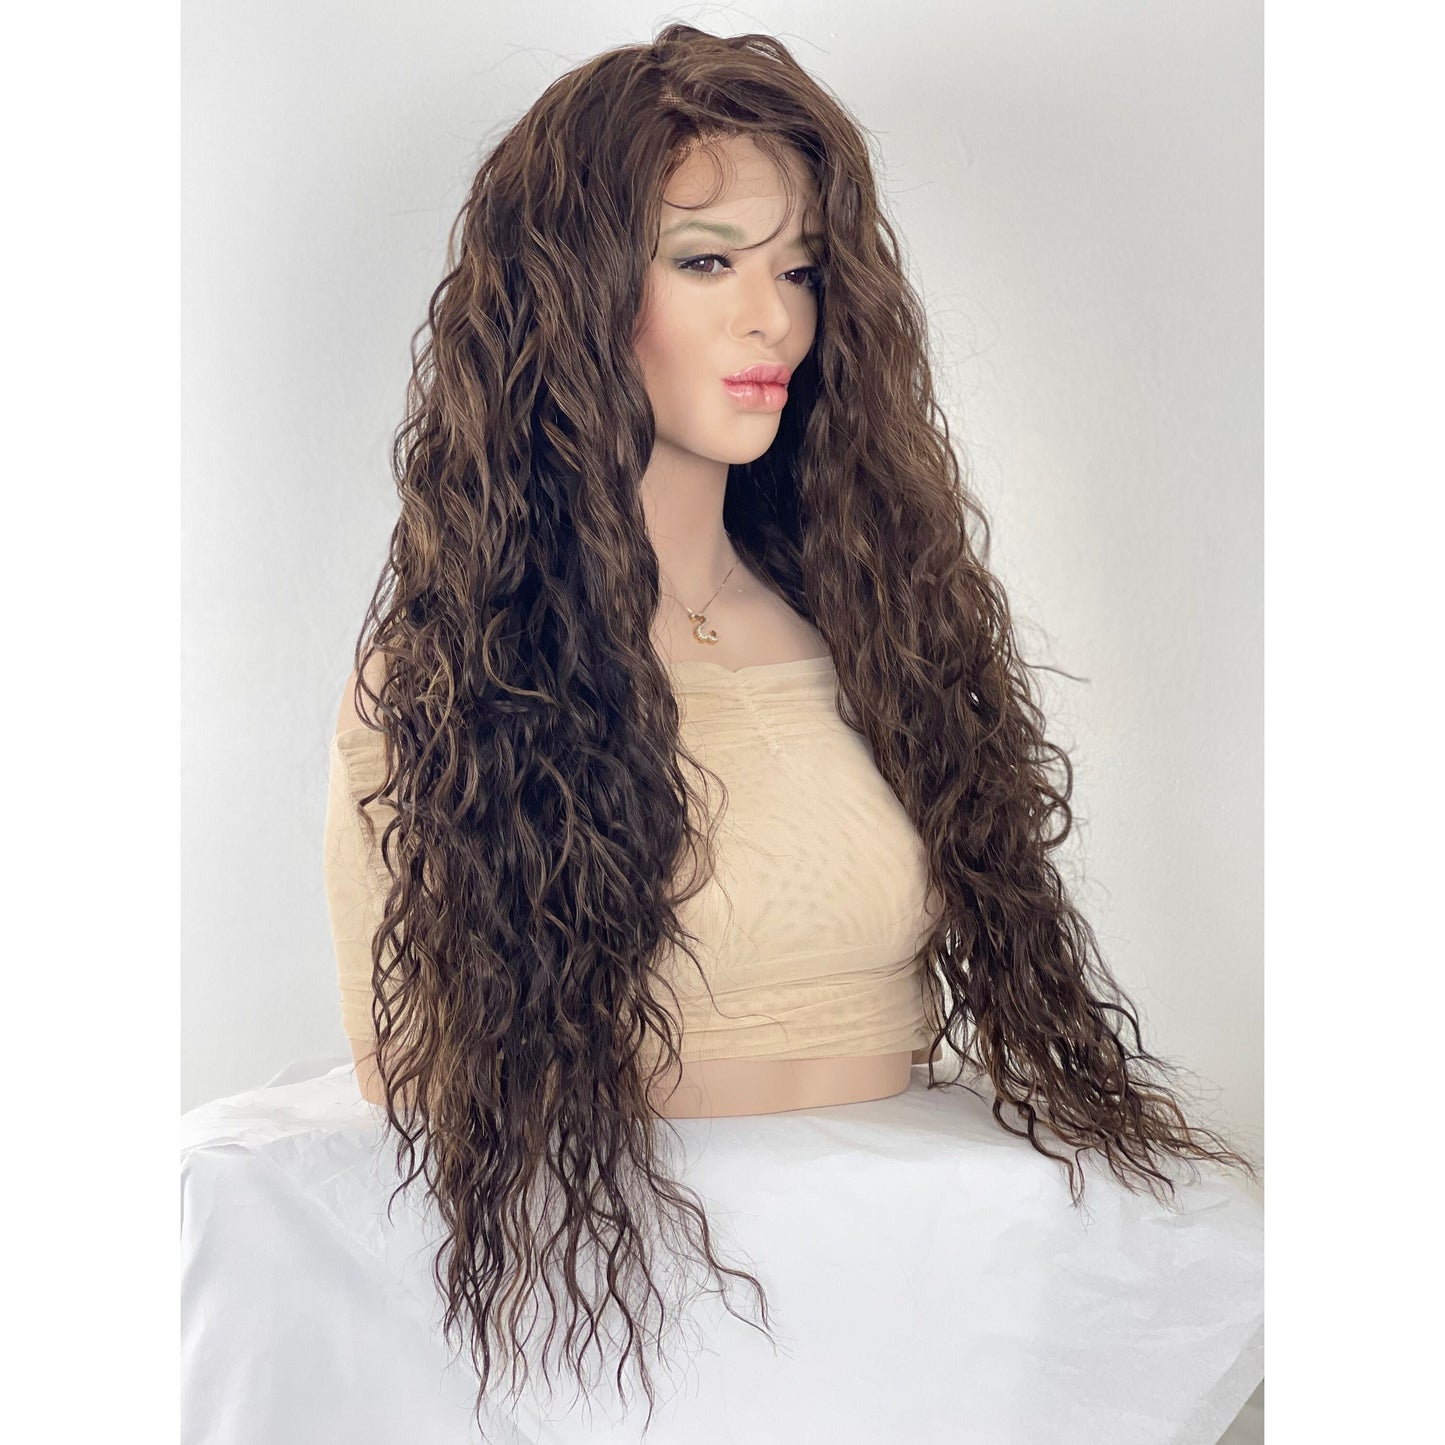 Brown Caramel Balayage Wavy 13x4 Preplucked Free Part Wig, Swiss Lace Front, Heat Resistant Human Hair Blend Wig